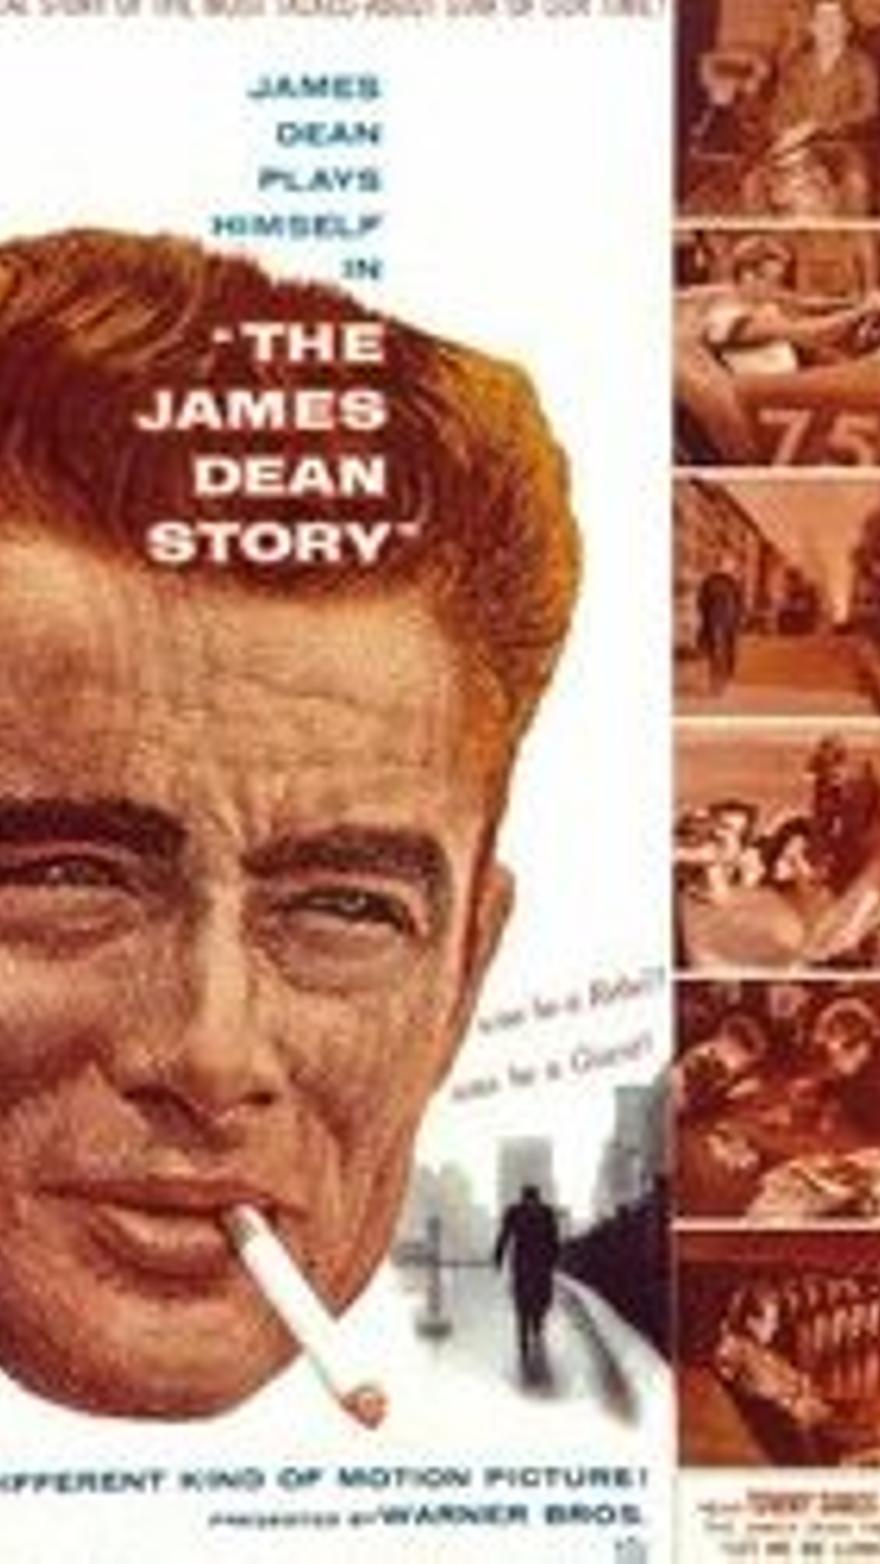 The James Dean Story